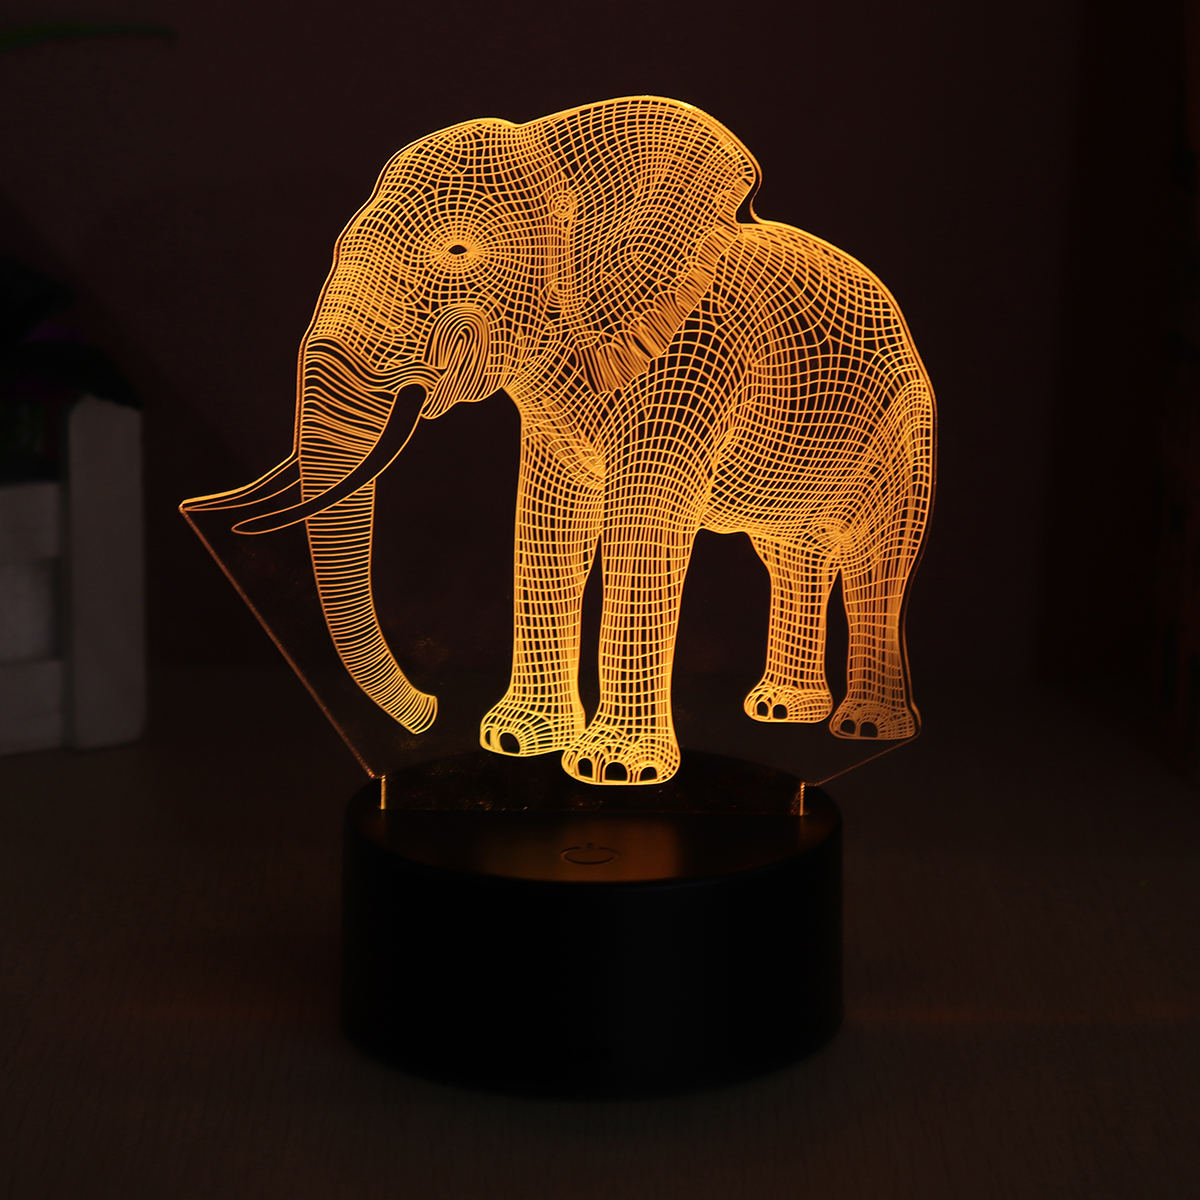 3D-Acrylic-LED-716-Colors-Colorful-Night-Lights-Elephant-Model-Remote-Control-Touch-Switch-Night-Lig-1370467-7